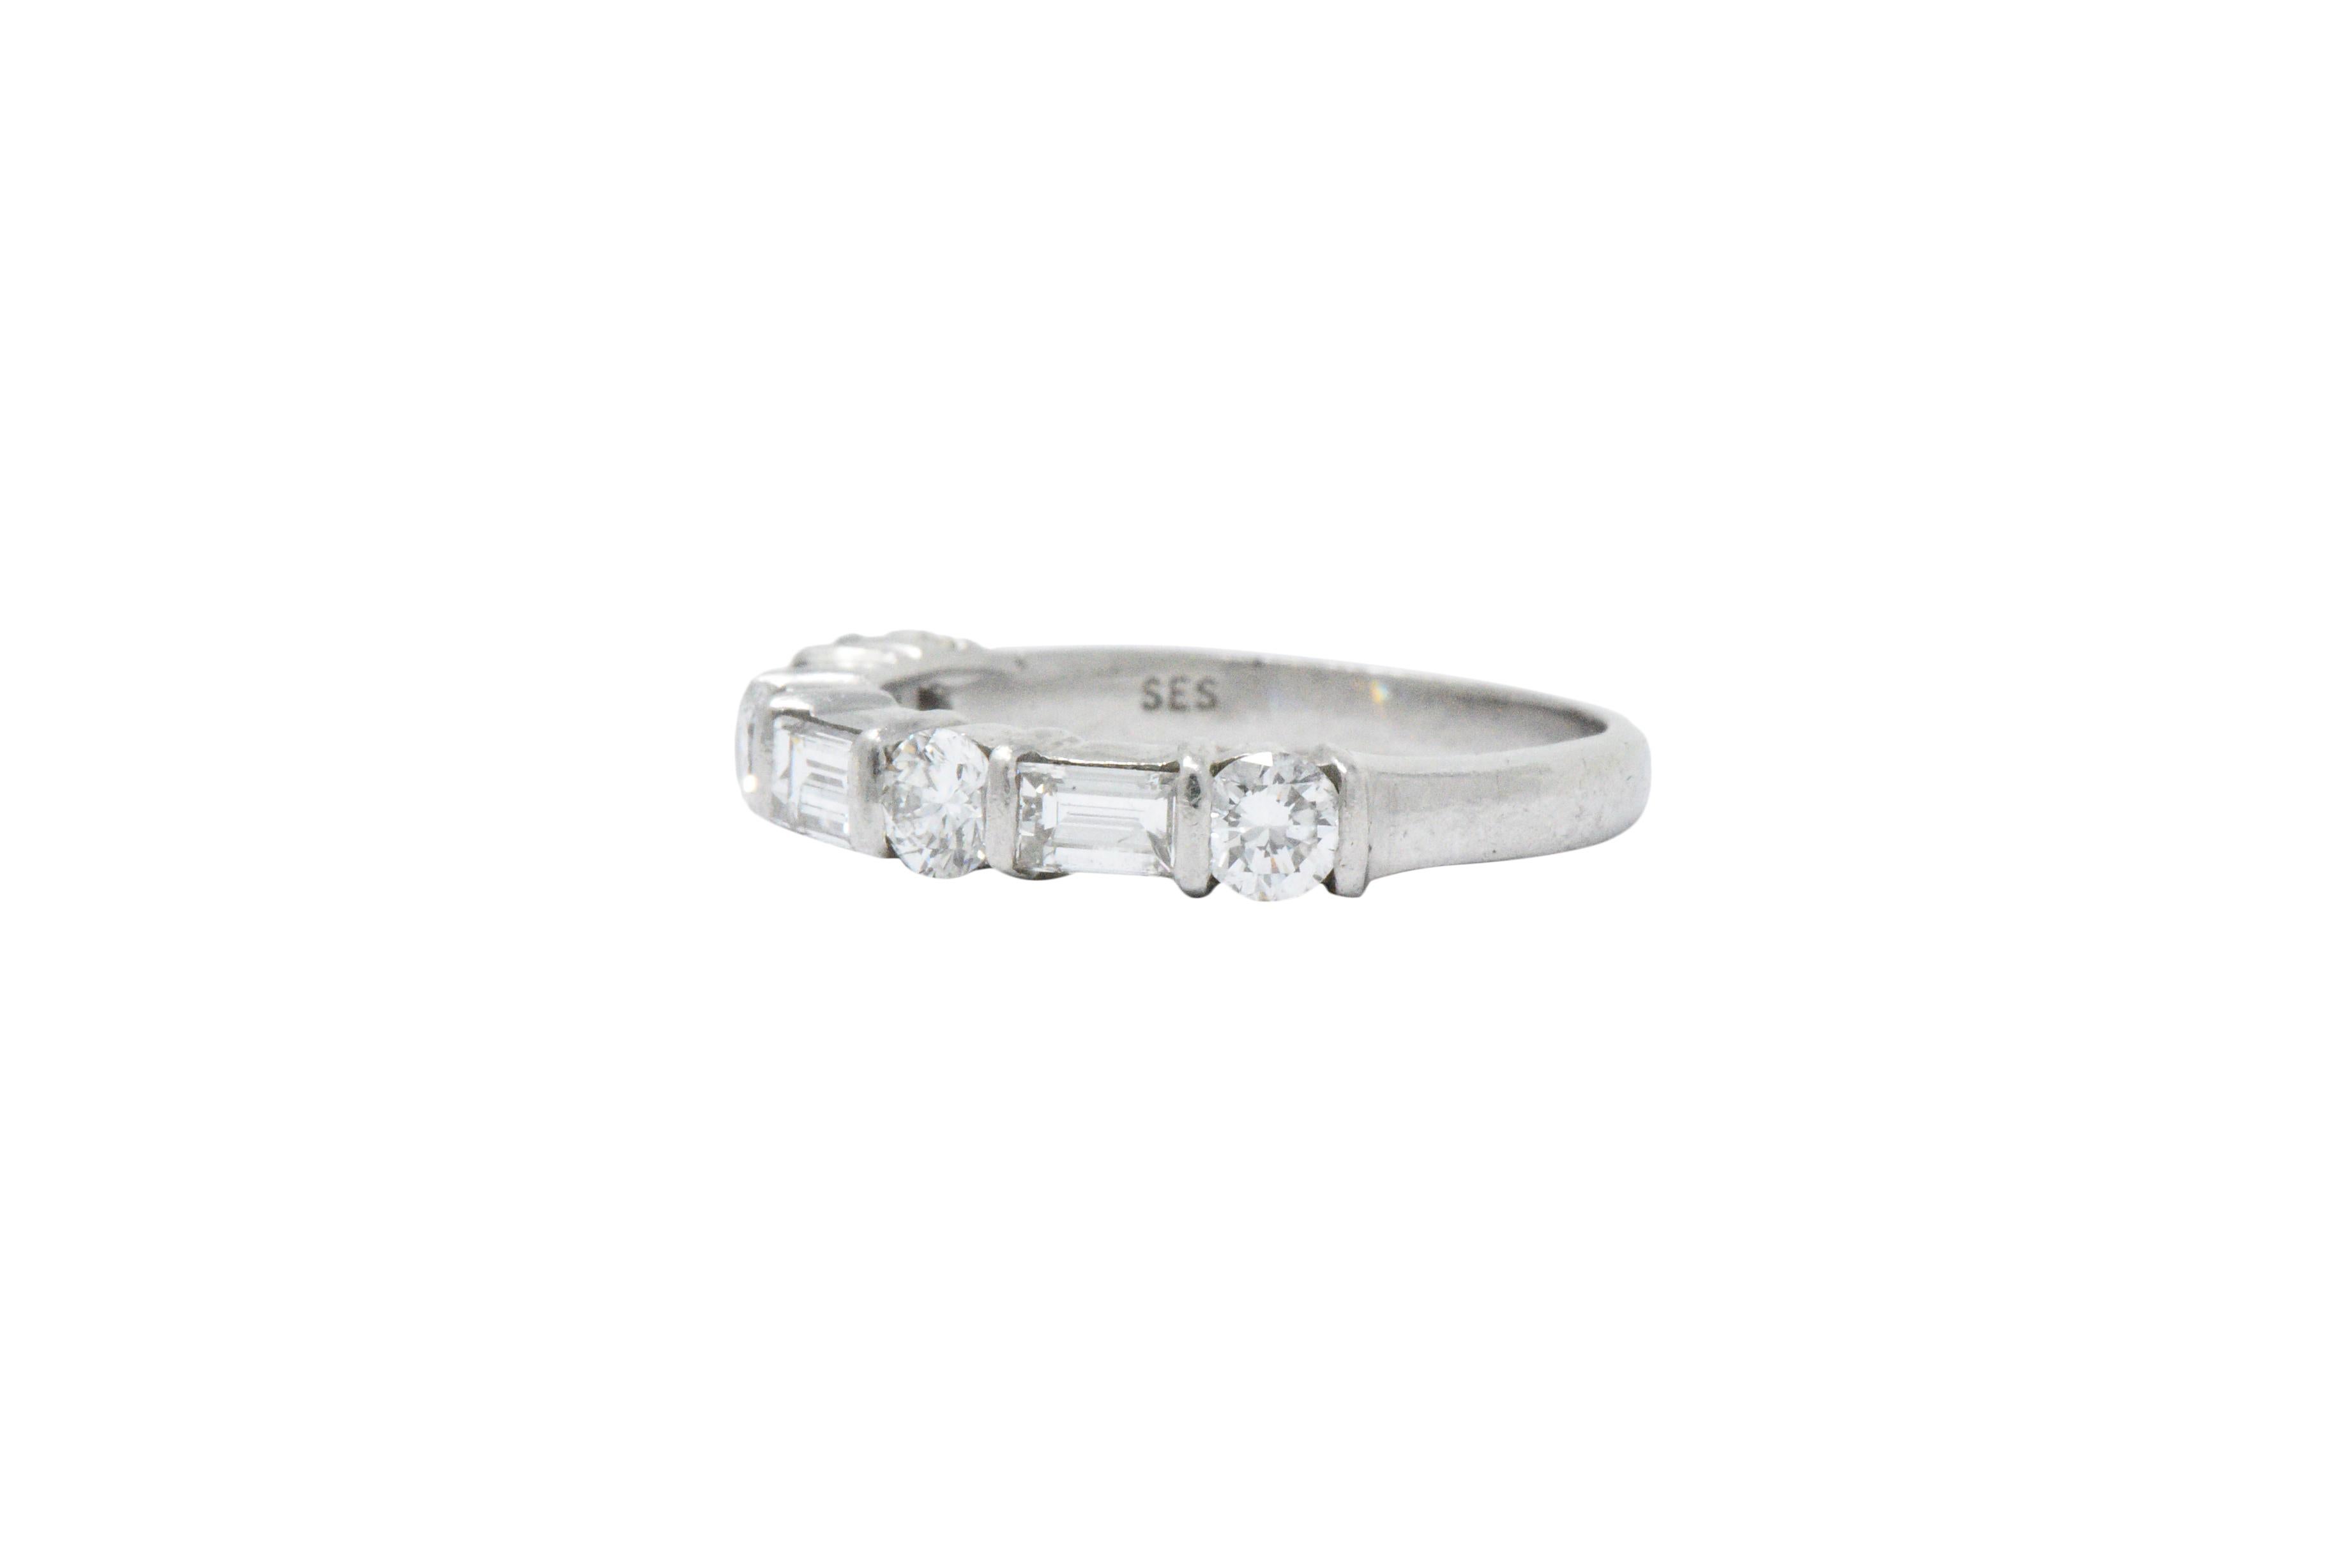 Set to the front with four round brilliant cut diamonds and three straight baguette cut diamonds, set alternating, approximately 1.14 carats total, GHI color and VS to SI clarity 

The diamonds are bar set, giving it a clean, sleek modern look

So